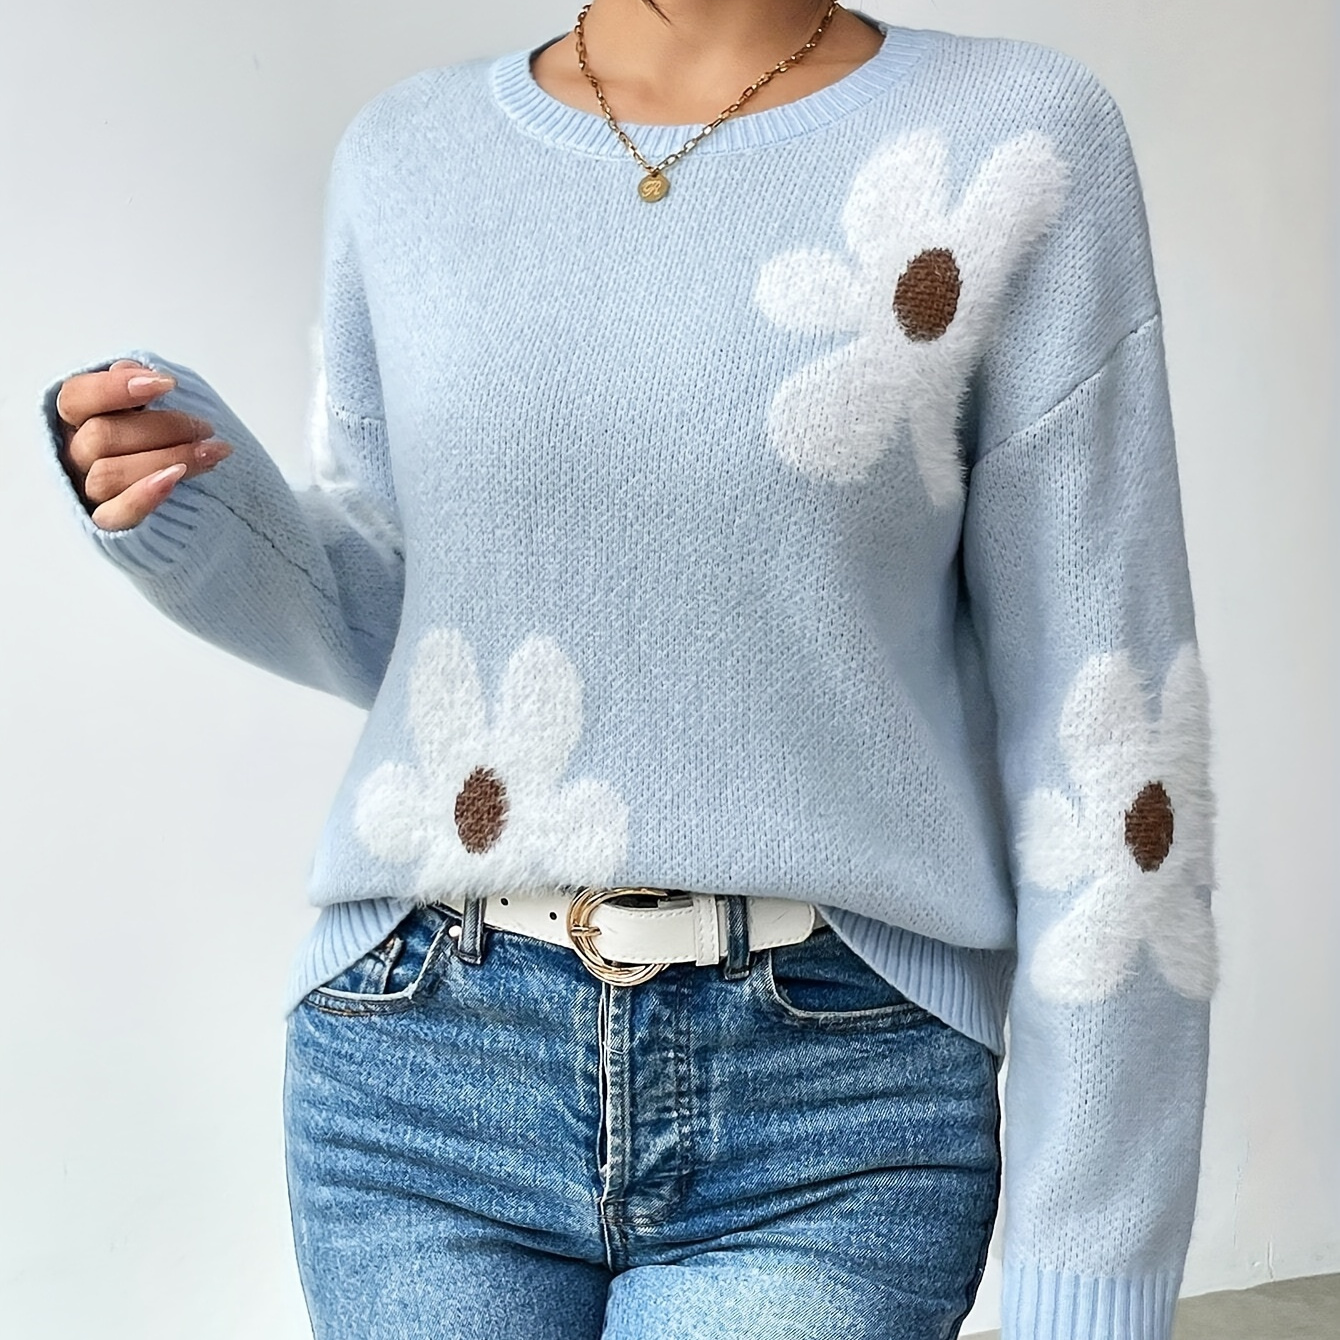 

Floral Pattern Drop Shoulder Sweater, Stylish Crew Neck Long Sleeve Pullover Sweater For Winter & Fall, Women's Clothing